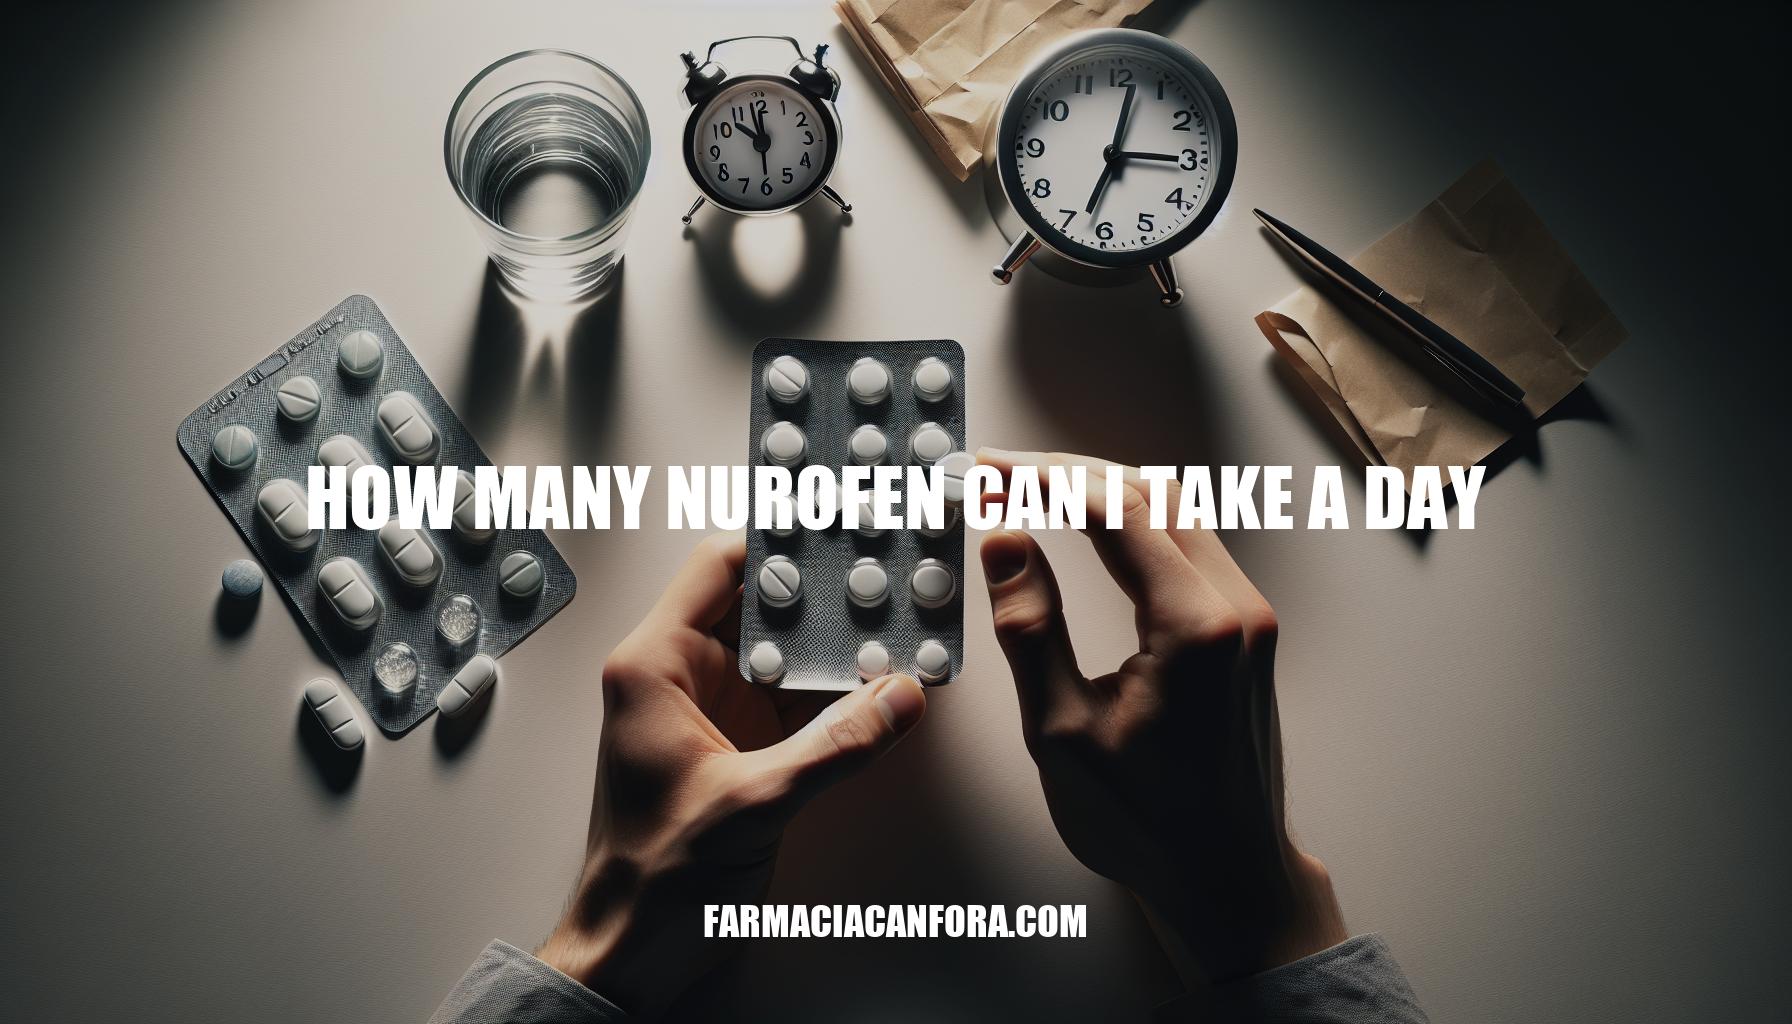 How Many Nurofen Can I Take a Day: Dosage Guidelines and Risks